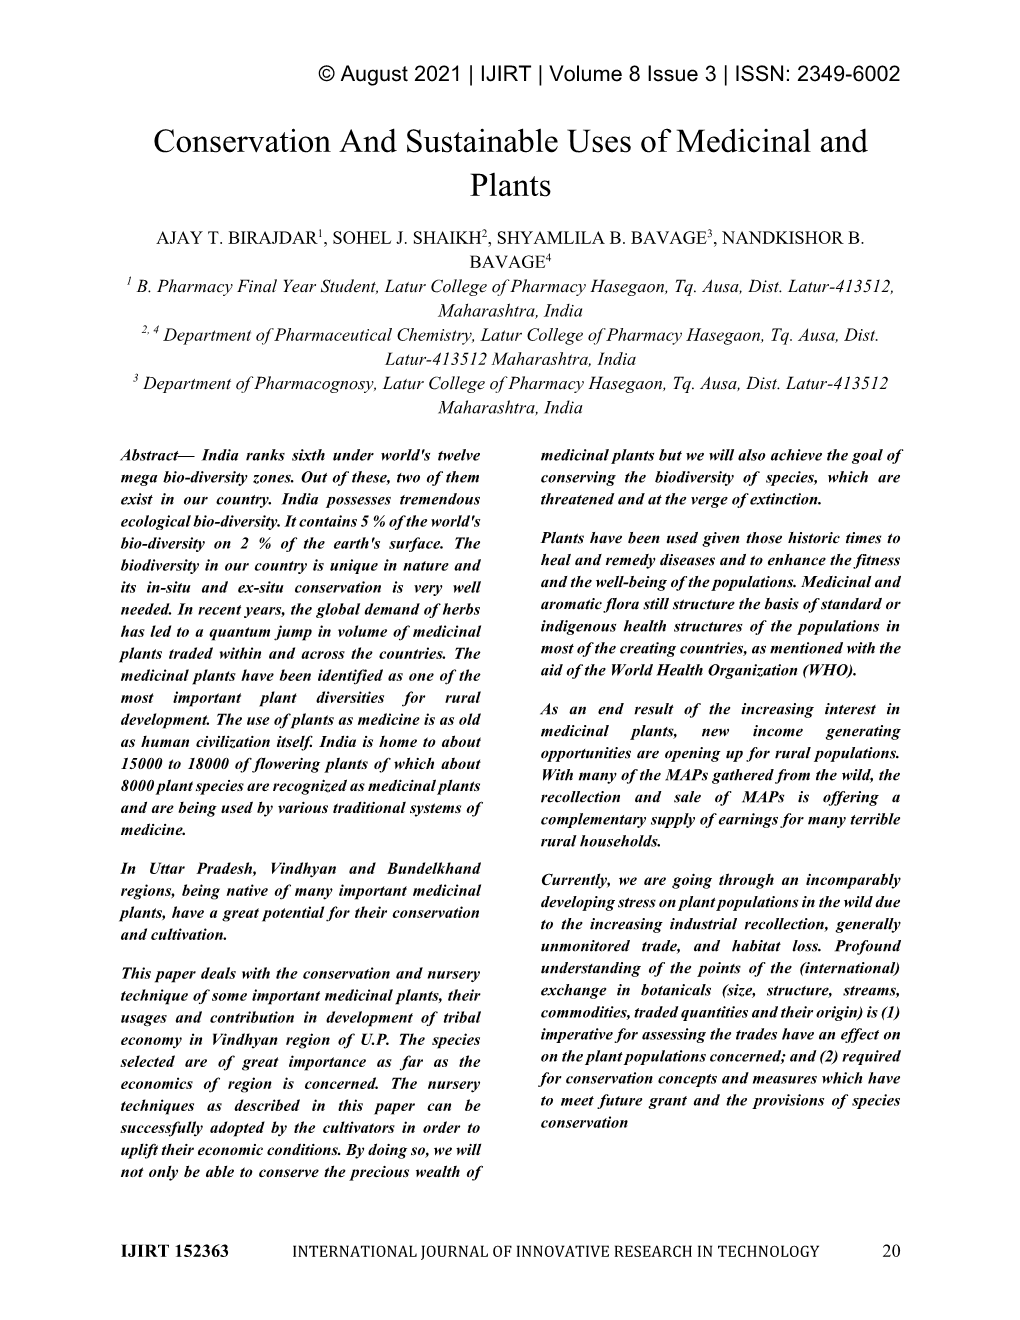 Conservation and Sustainable Uses of Medicinal and Plants